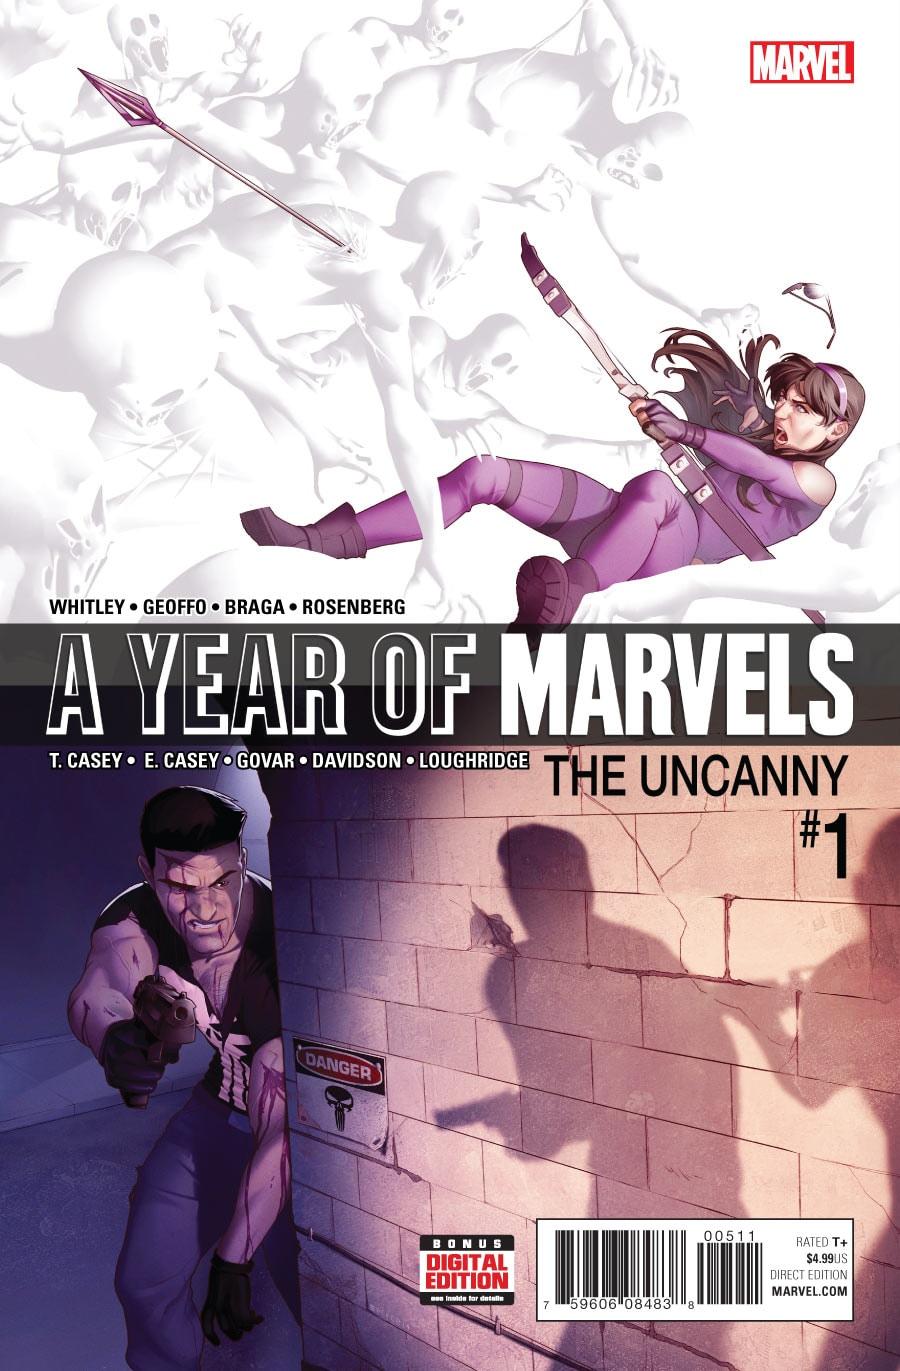 A Year of Marvels: The Uncanny Vol. 1 #1